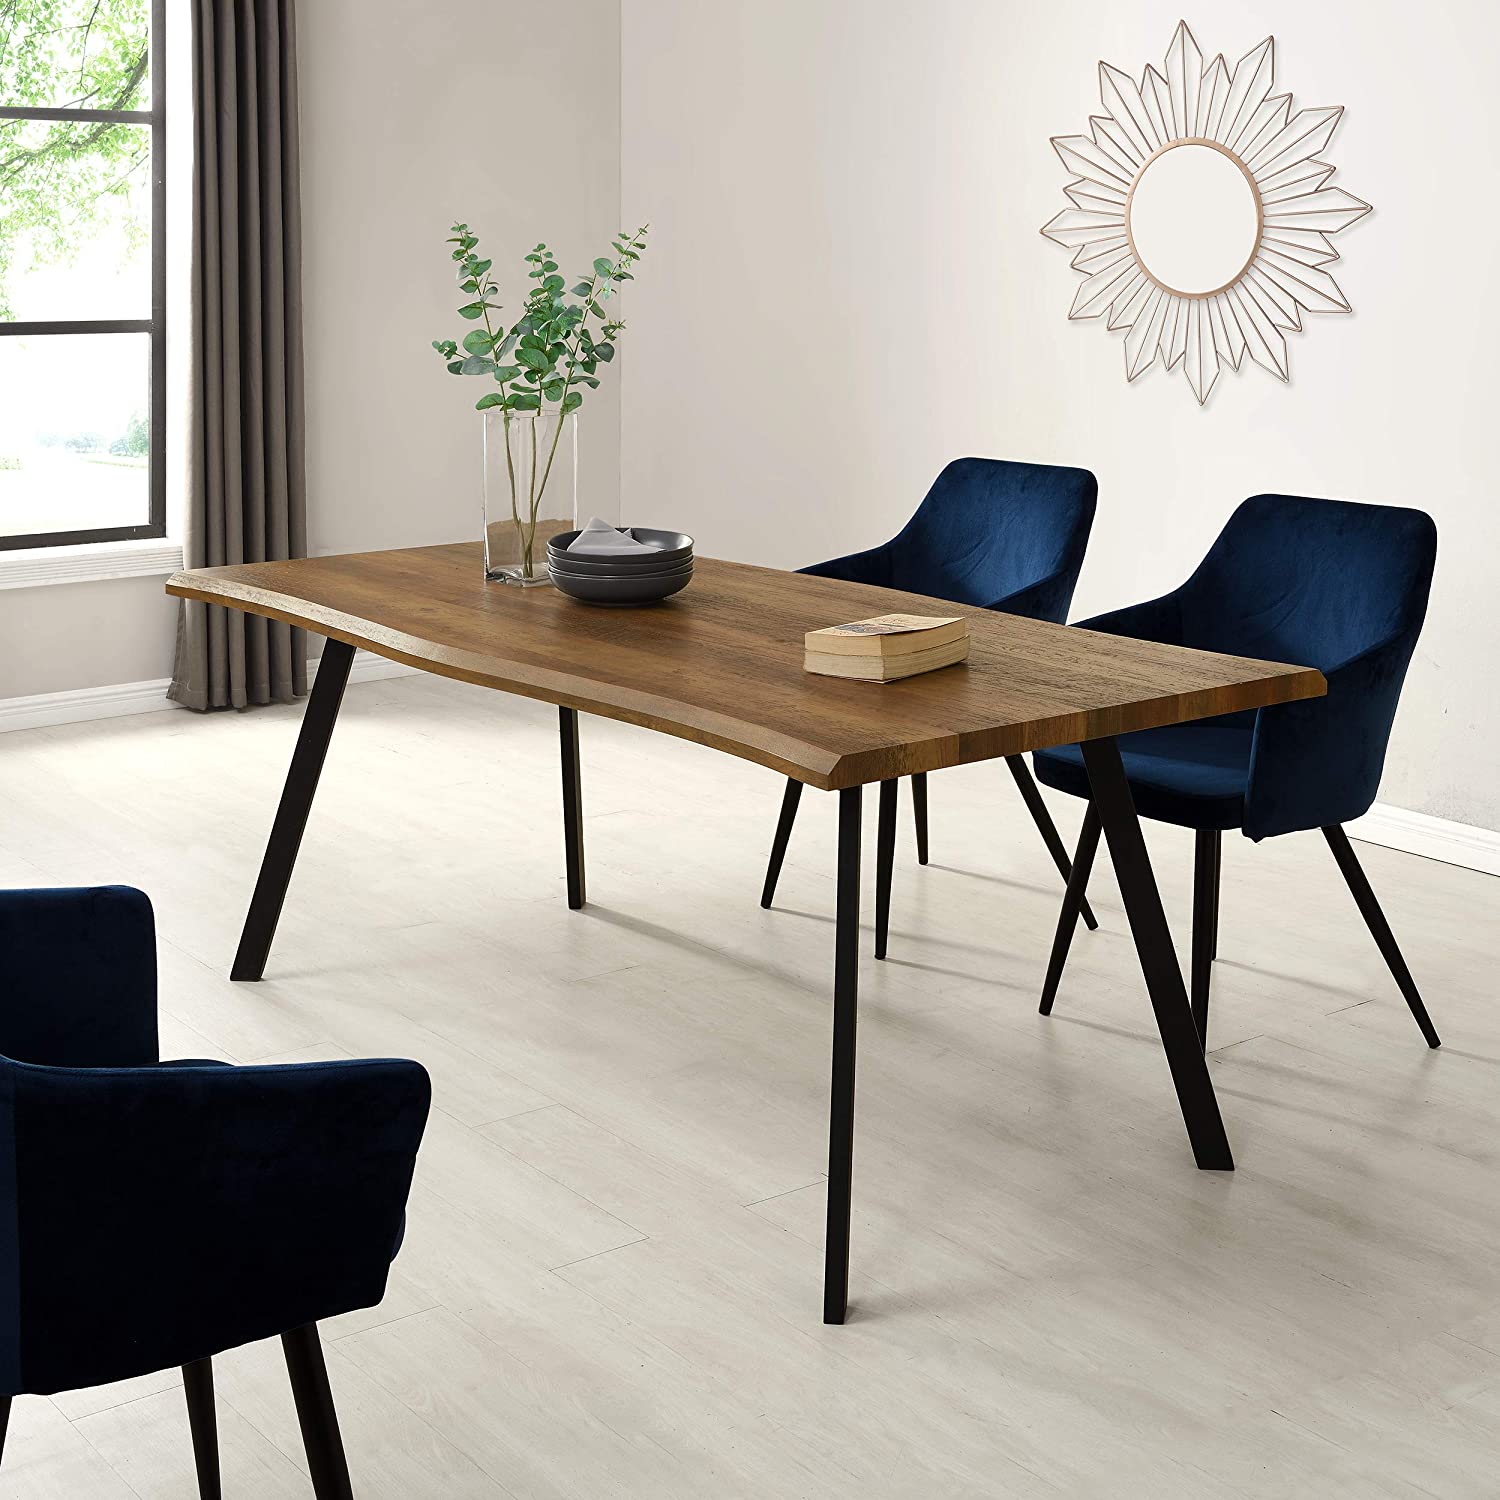 Kenora Wood Effect 180 cm Dining Table with Curved Edges 6 Seater